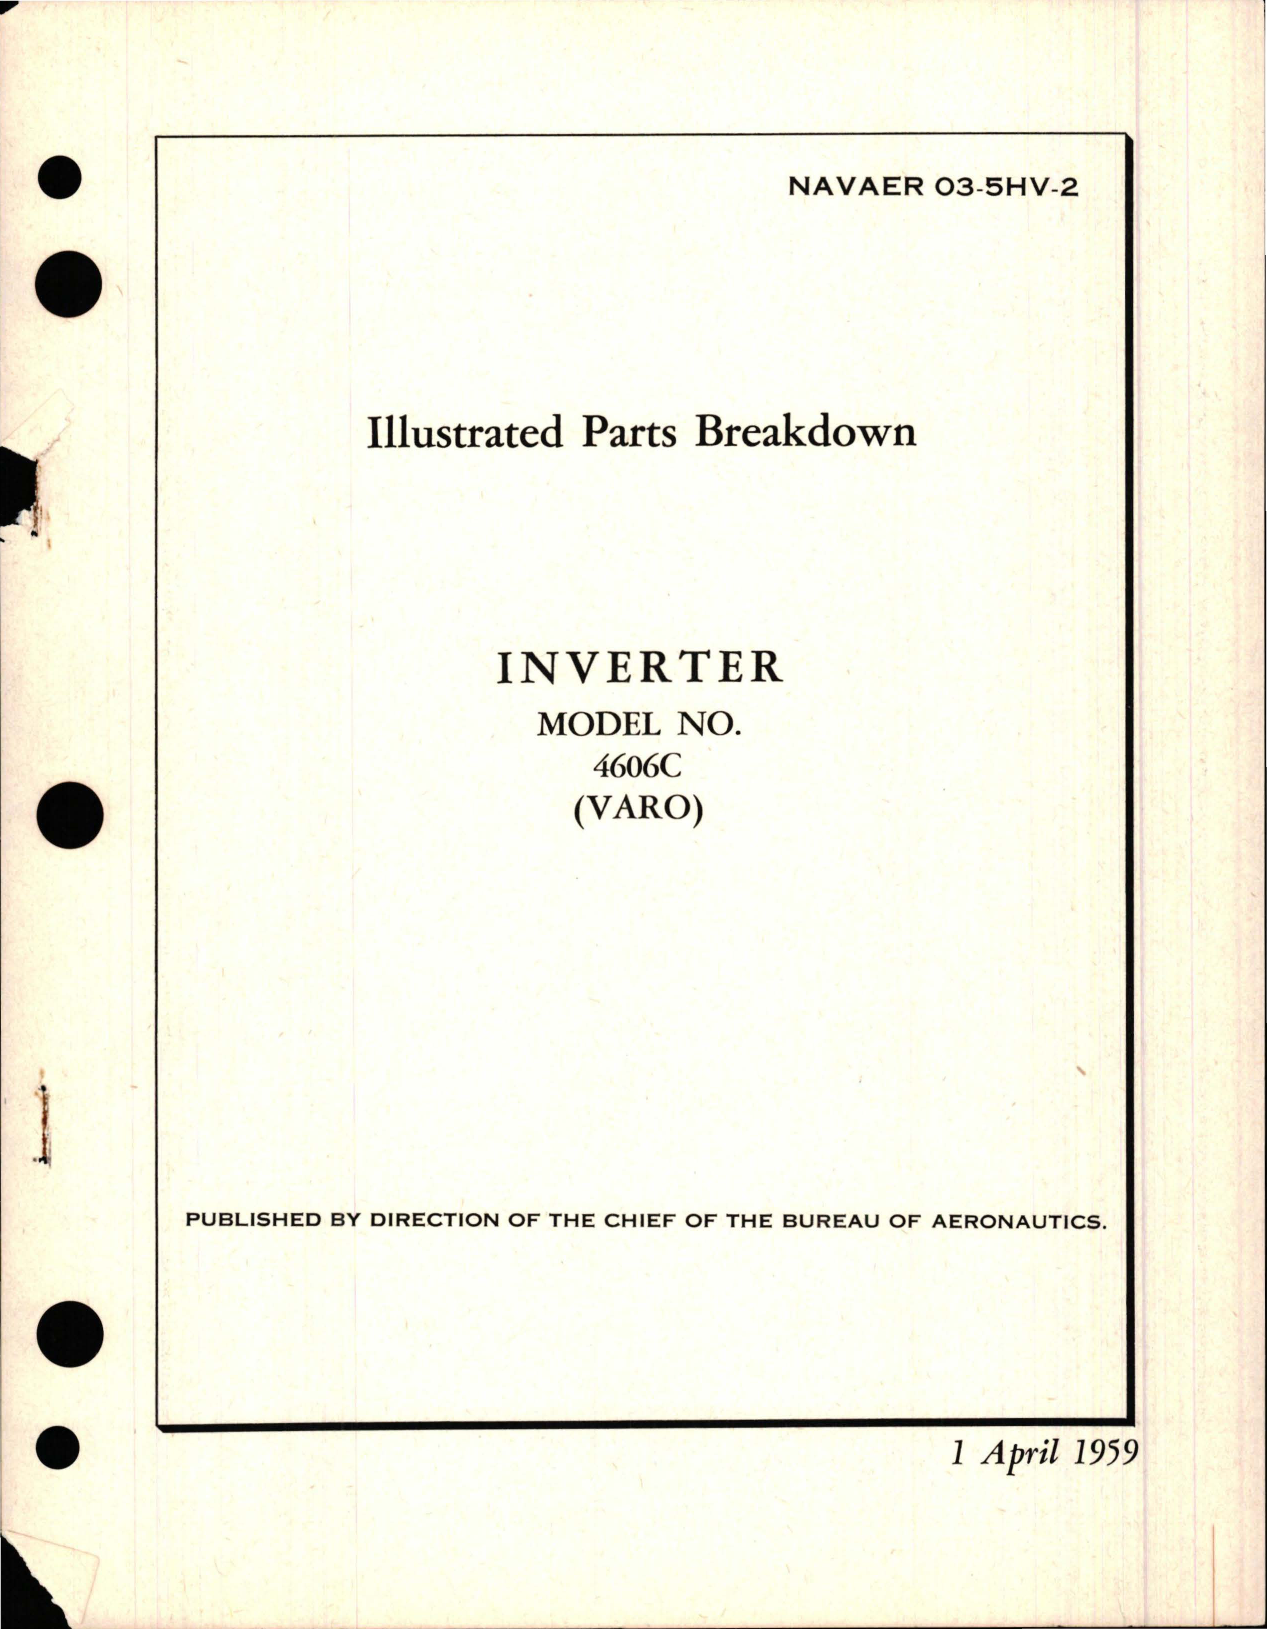 Sample page 1 from AirCorps Library document: Illustrated Parts Breakdown for Inverter - Model 4606C